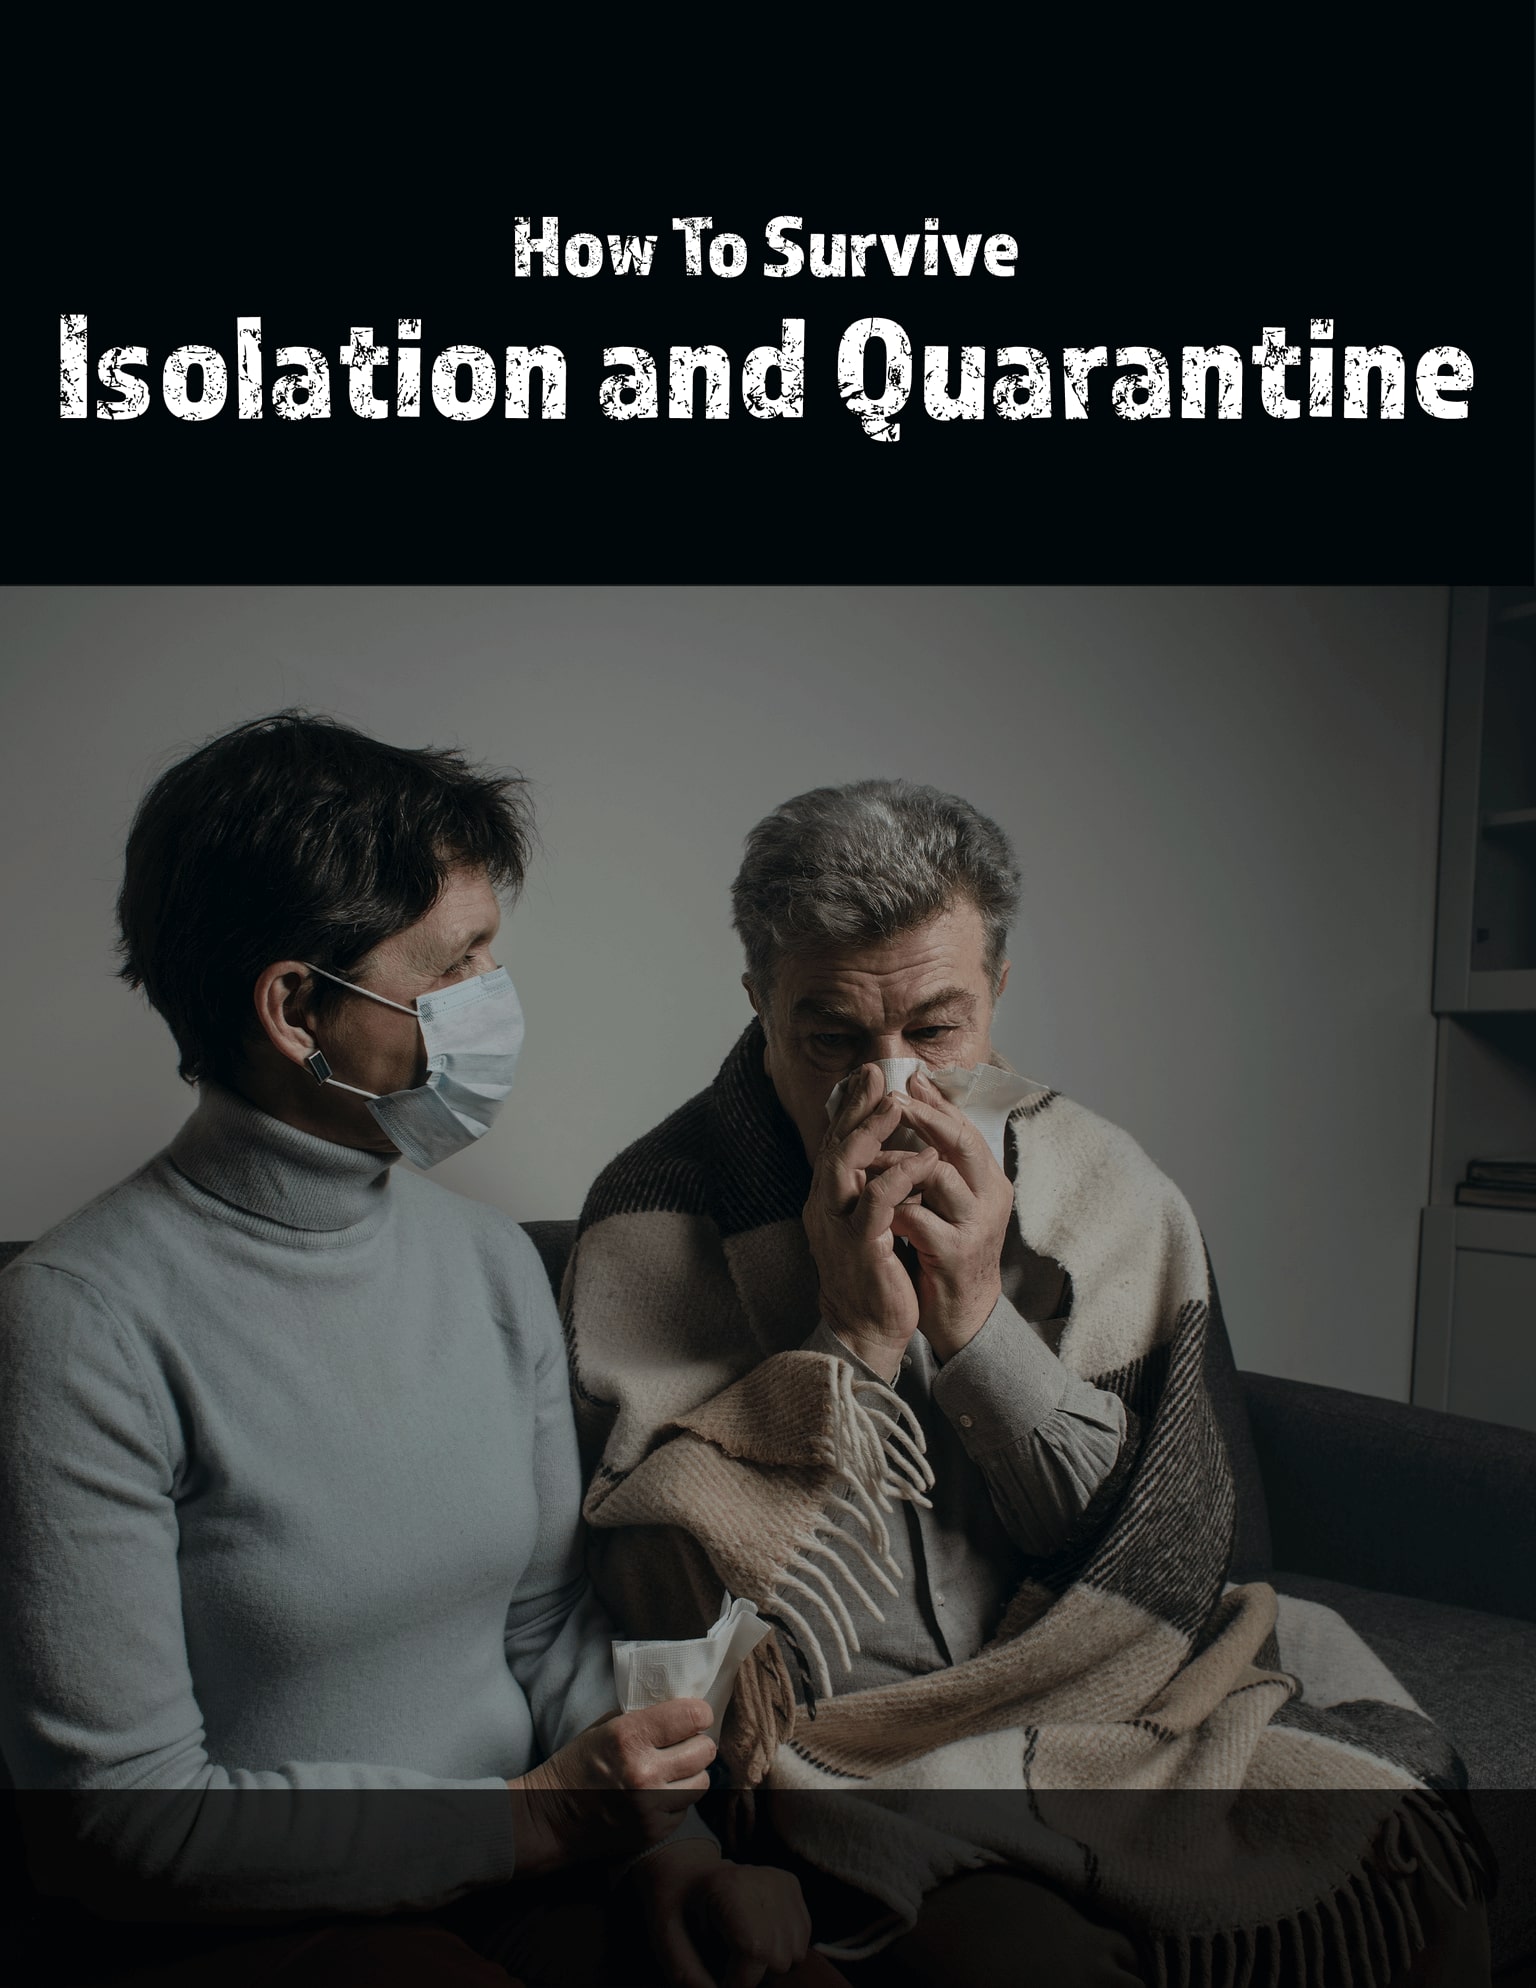 How to survive isolation and quarantineproduct